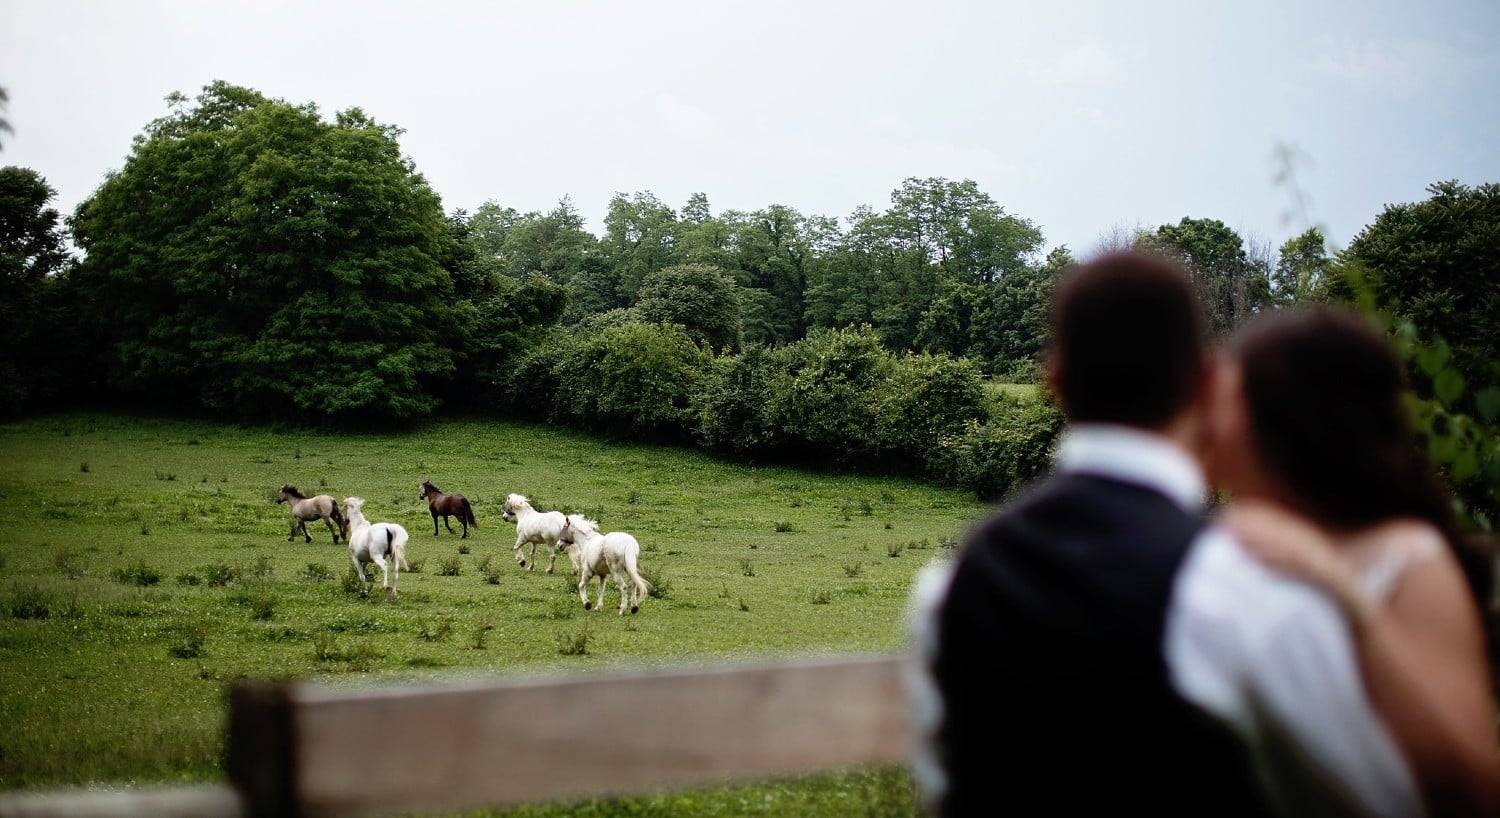 A bride and groom standing together overlooking a horse pasture